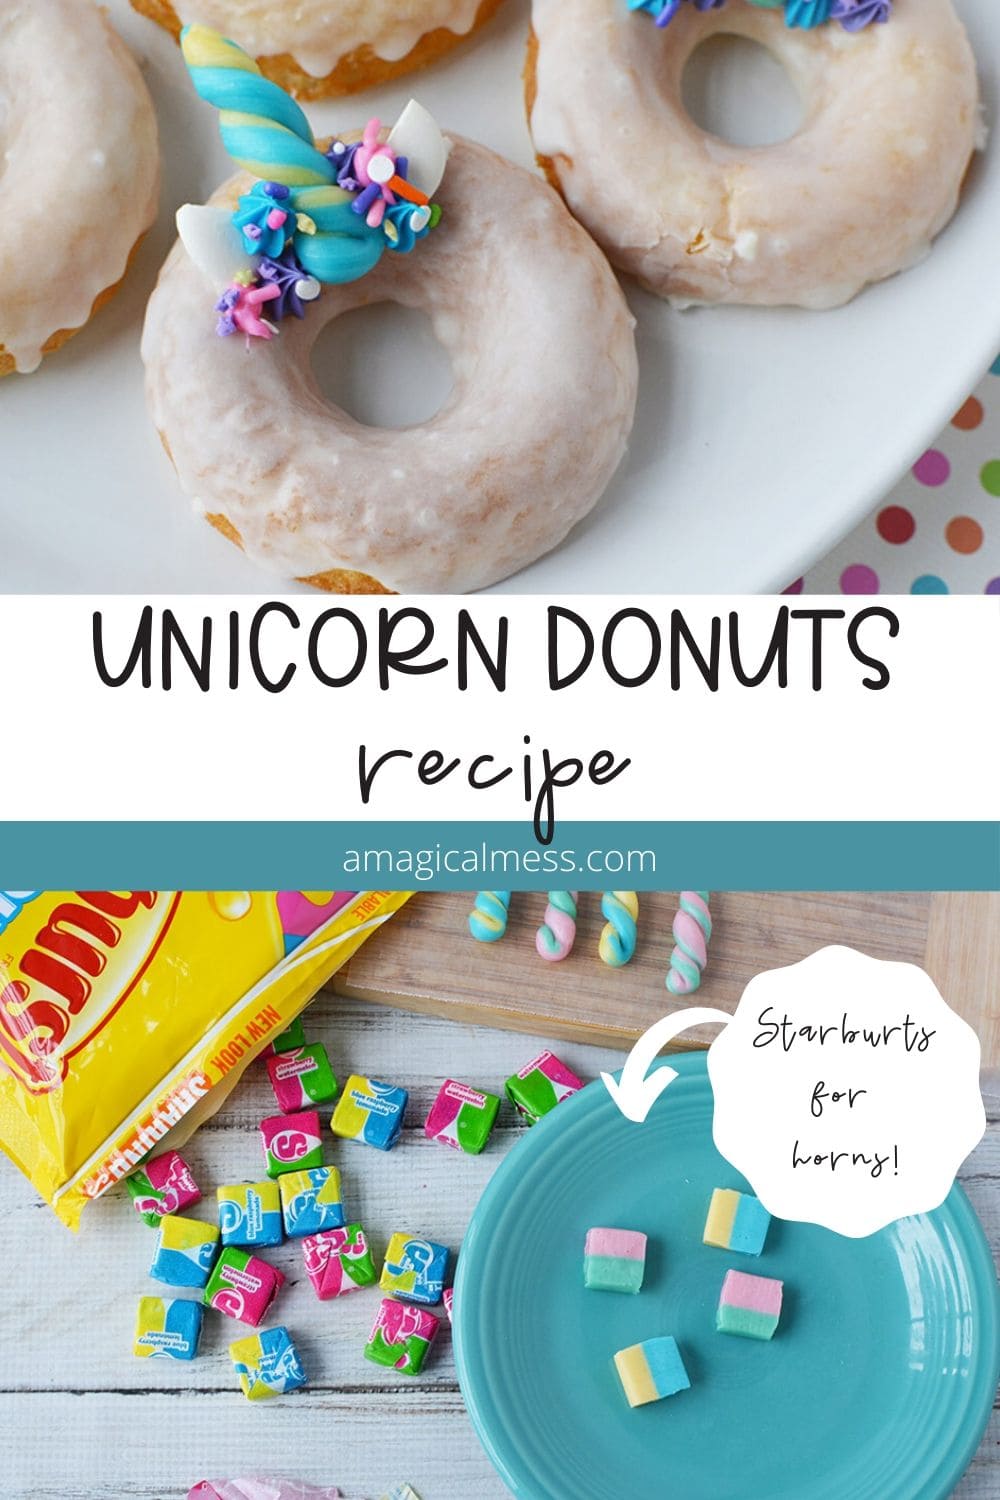 Unicorn donuts and candy that makes the horn